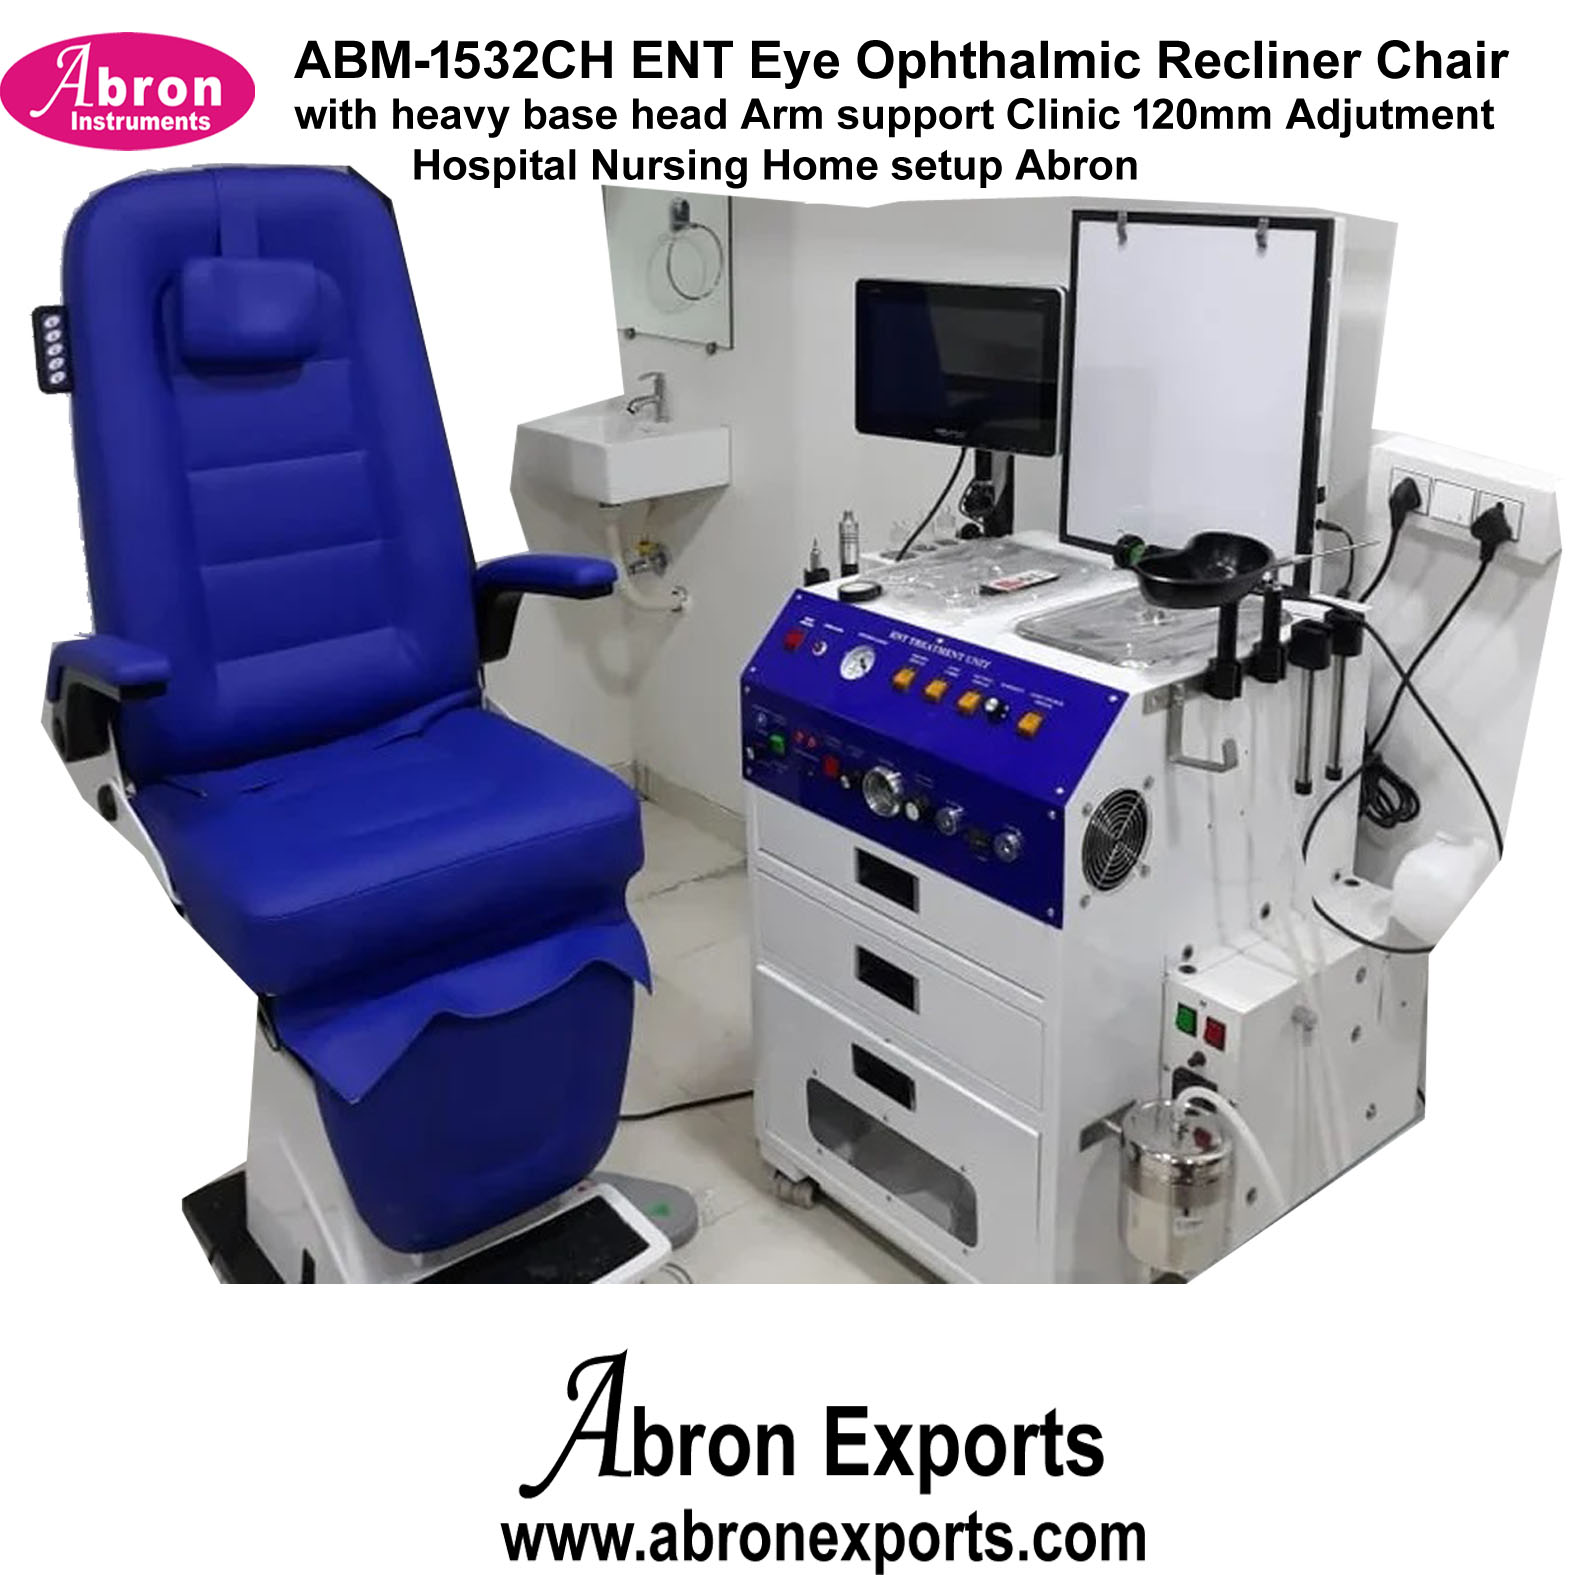 ENT Eye Ophthalmic Recliner Chair with heavy base head Arm support Clinic 120mm adjutment 1830Lx 600W x810H mmHospital Nursing Home setup Abron ABM-1532CH 